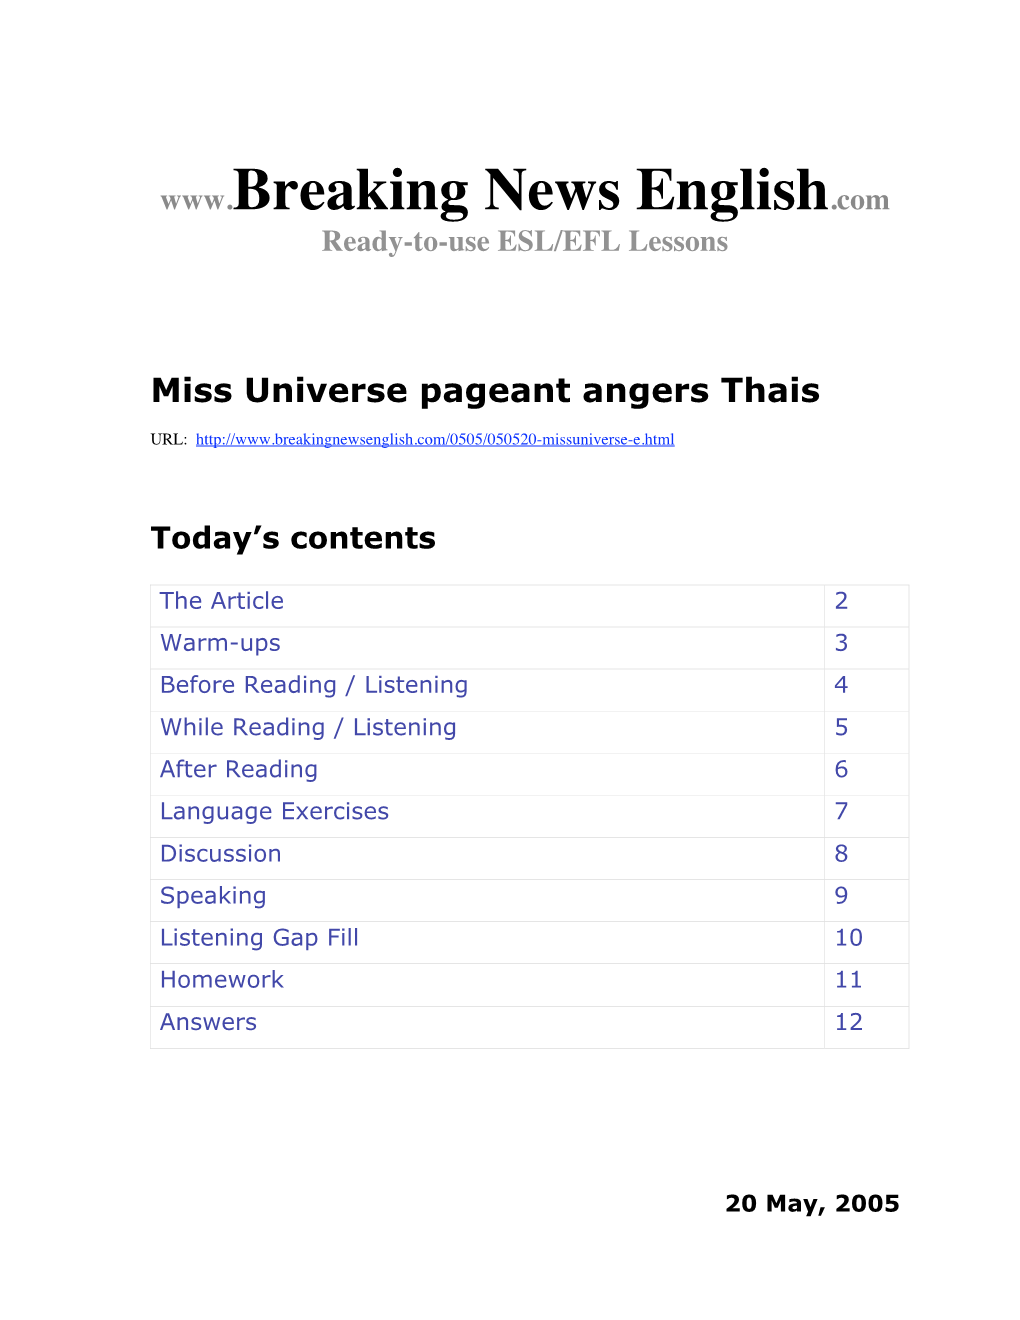 THE ARTICLE Miss Universe Pageant Angers